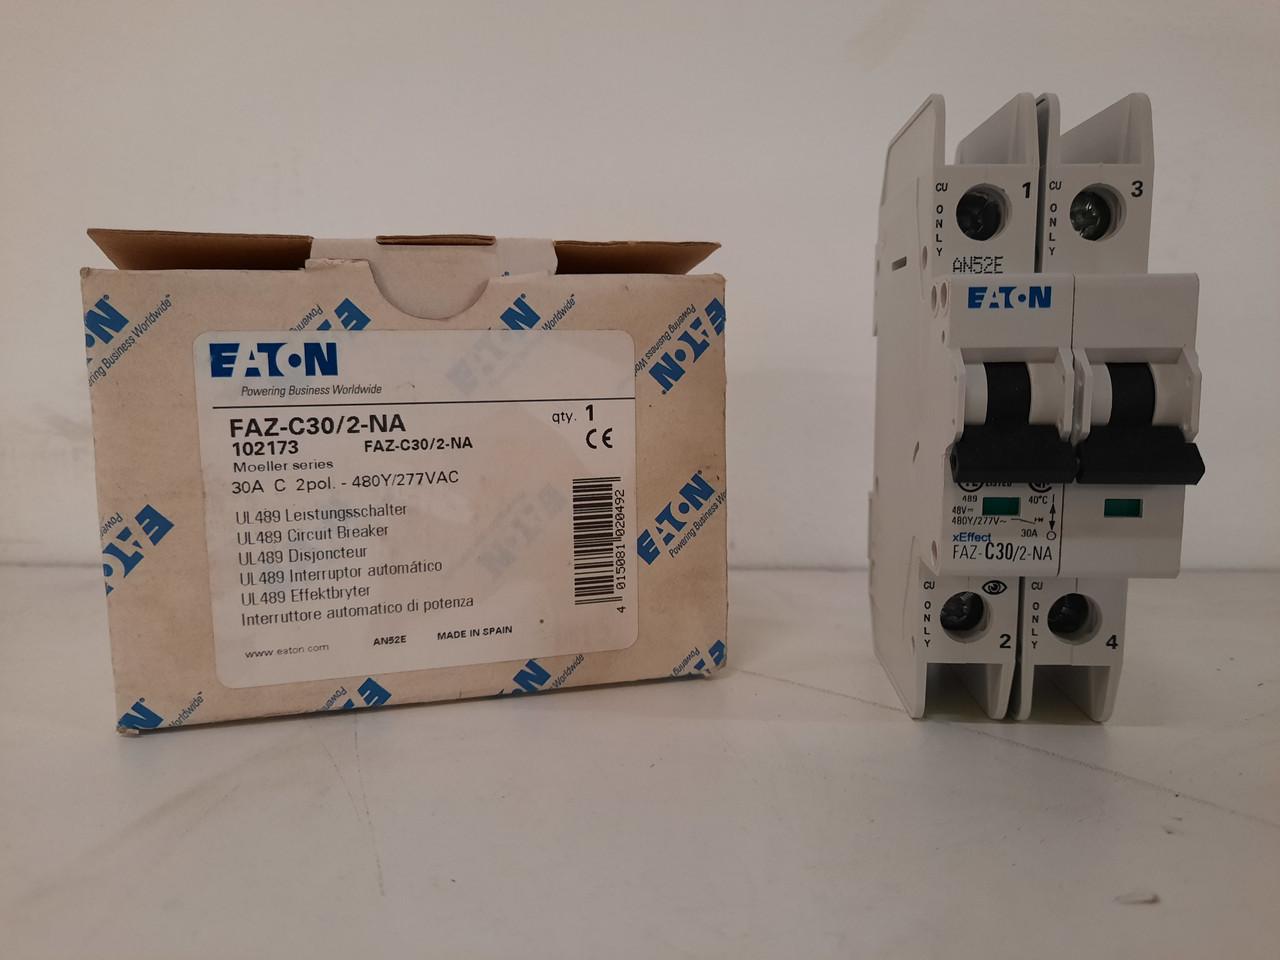 Eaton FAZ-C30/2-NA 277/480 VAC 50/60 Hz, 30 A, 2-Pole, 10/14 kA, 5 to 10 x Rated Current, Screw Terminal, DIN Rail Mount, Standard Packaging, C-Curve, Current Limiting, Thermal Magnetic